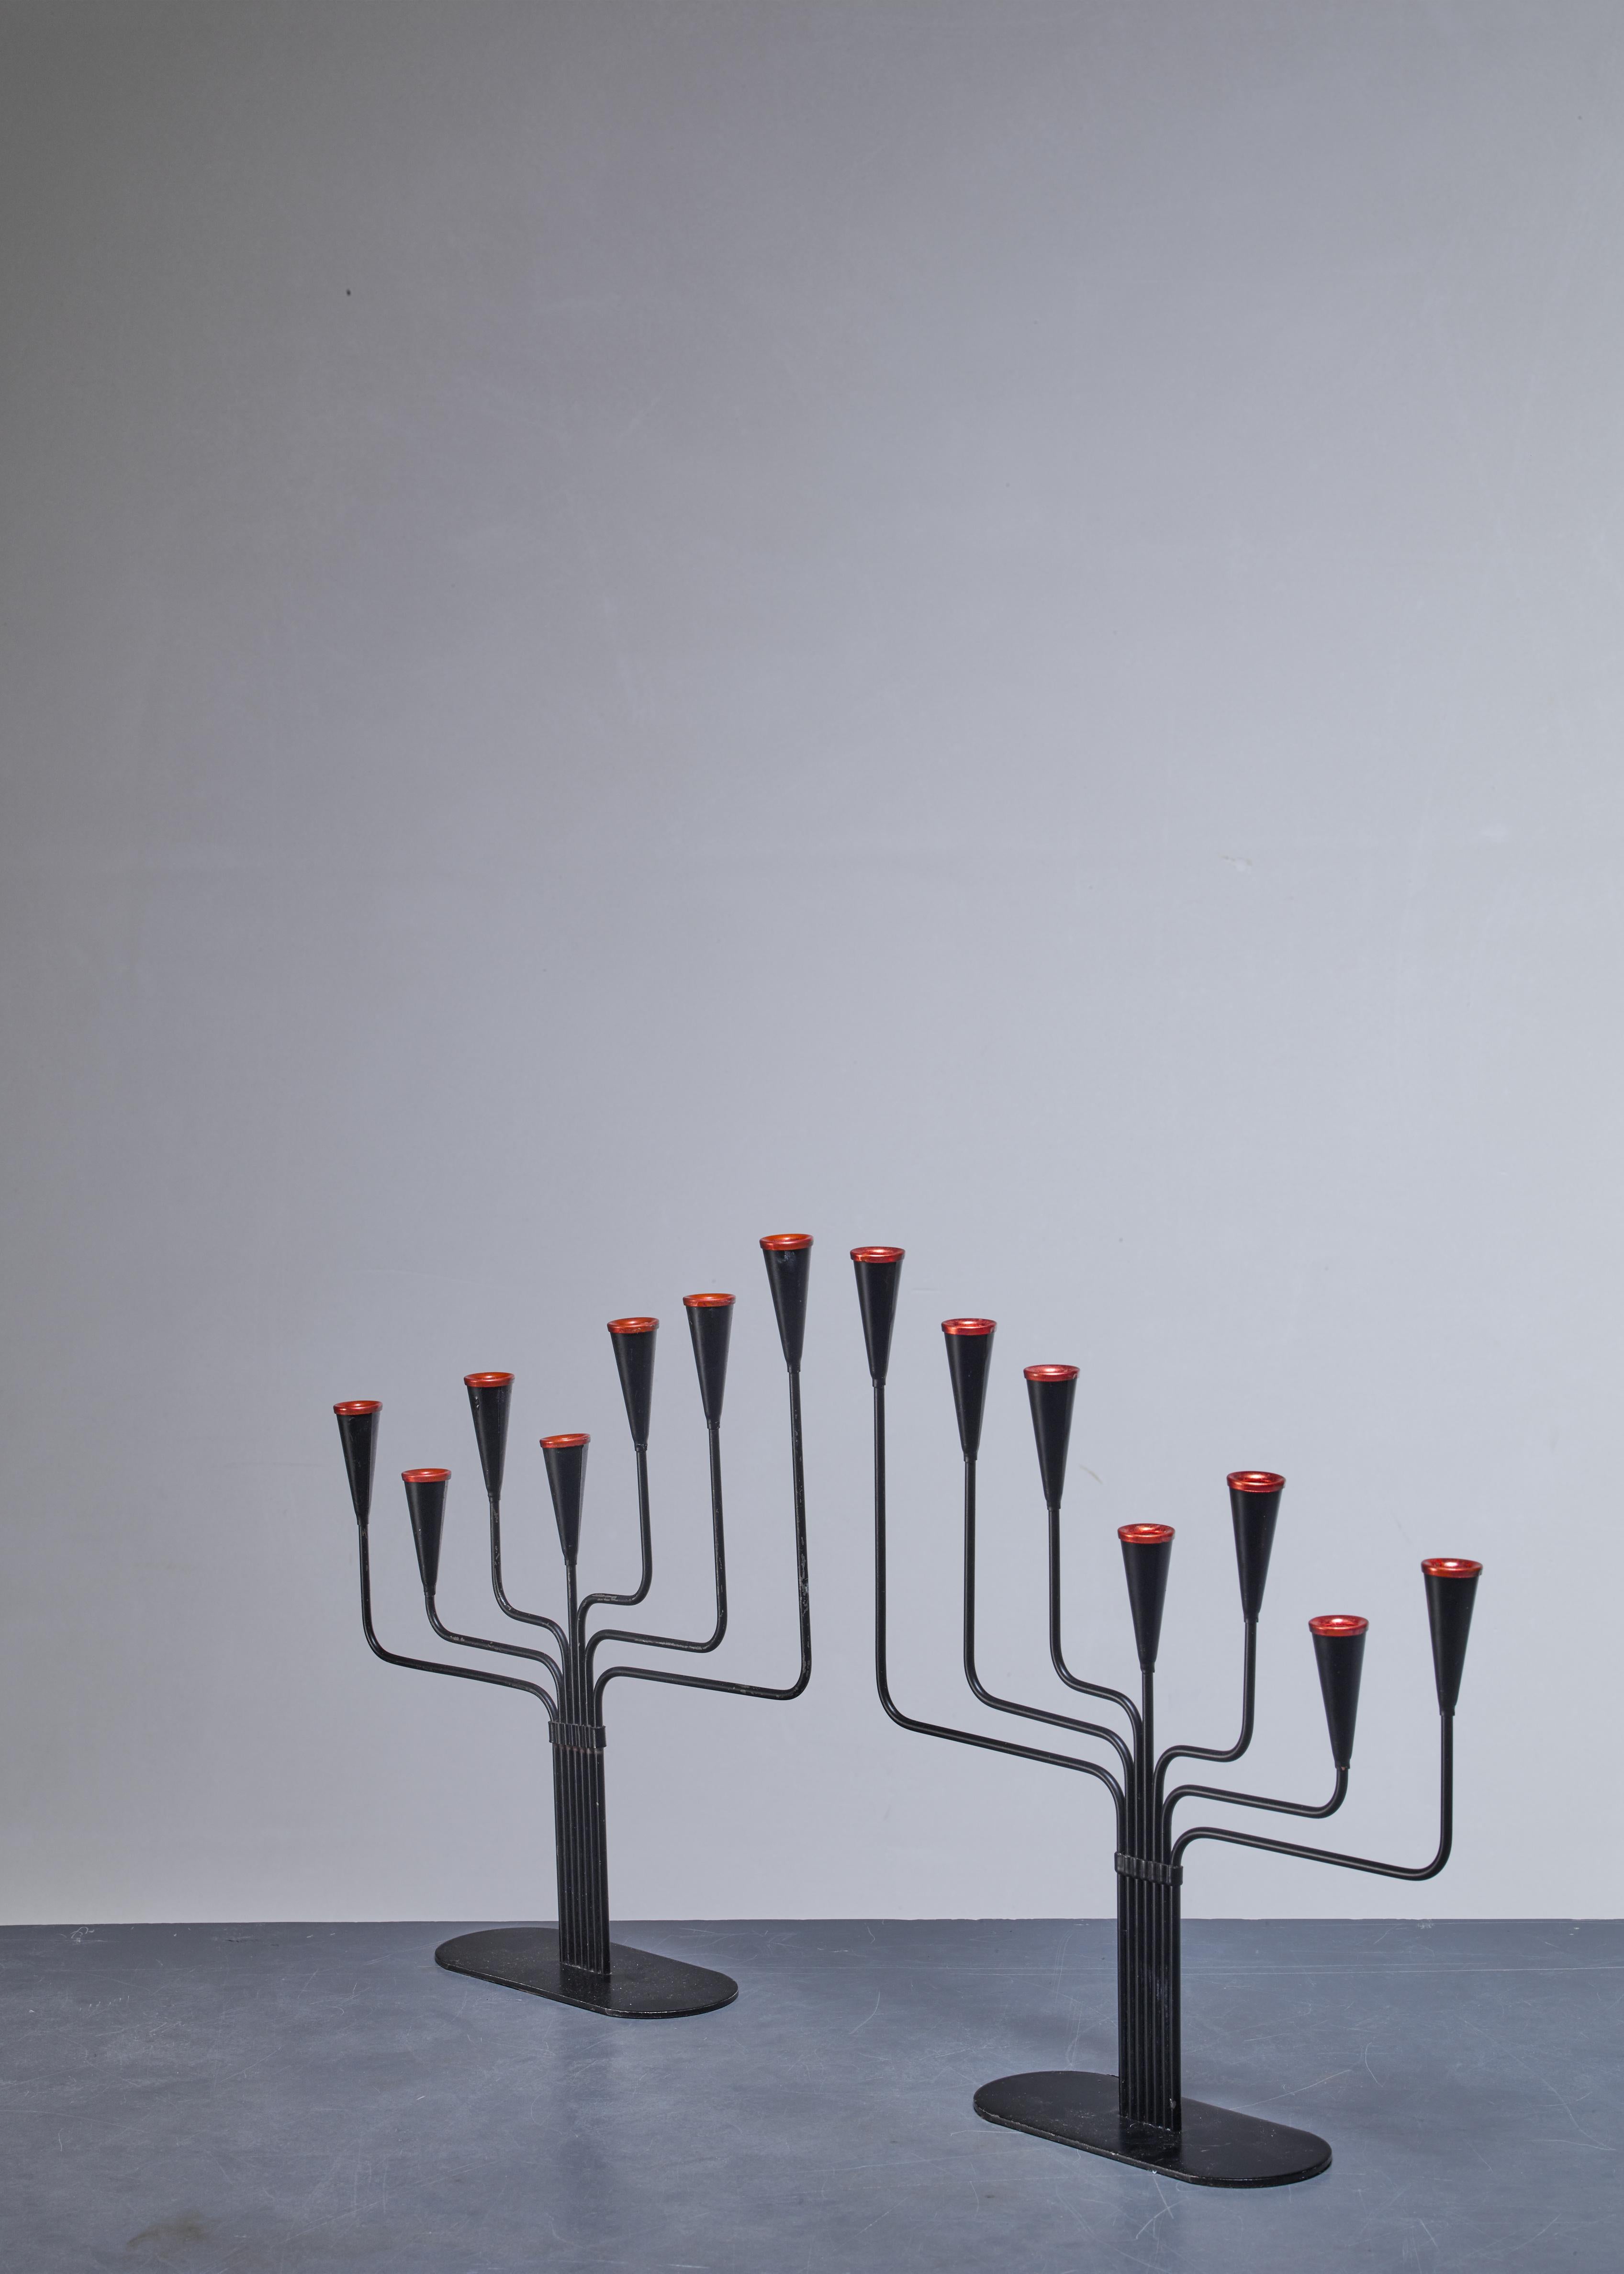 A pair of candelabra for seven candles each, designed by Gunnar Ander for Ystad, Sweden.
They are made of black lacquered metal with copper details.

The set as per the last picture is also available.